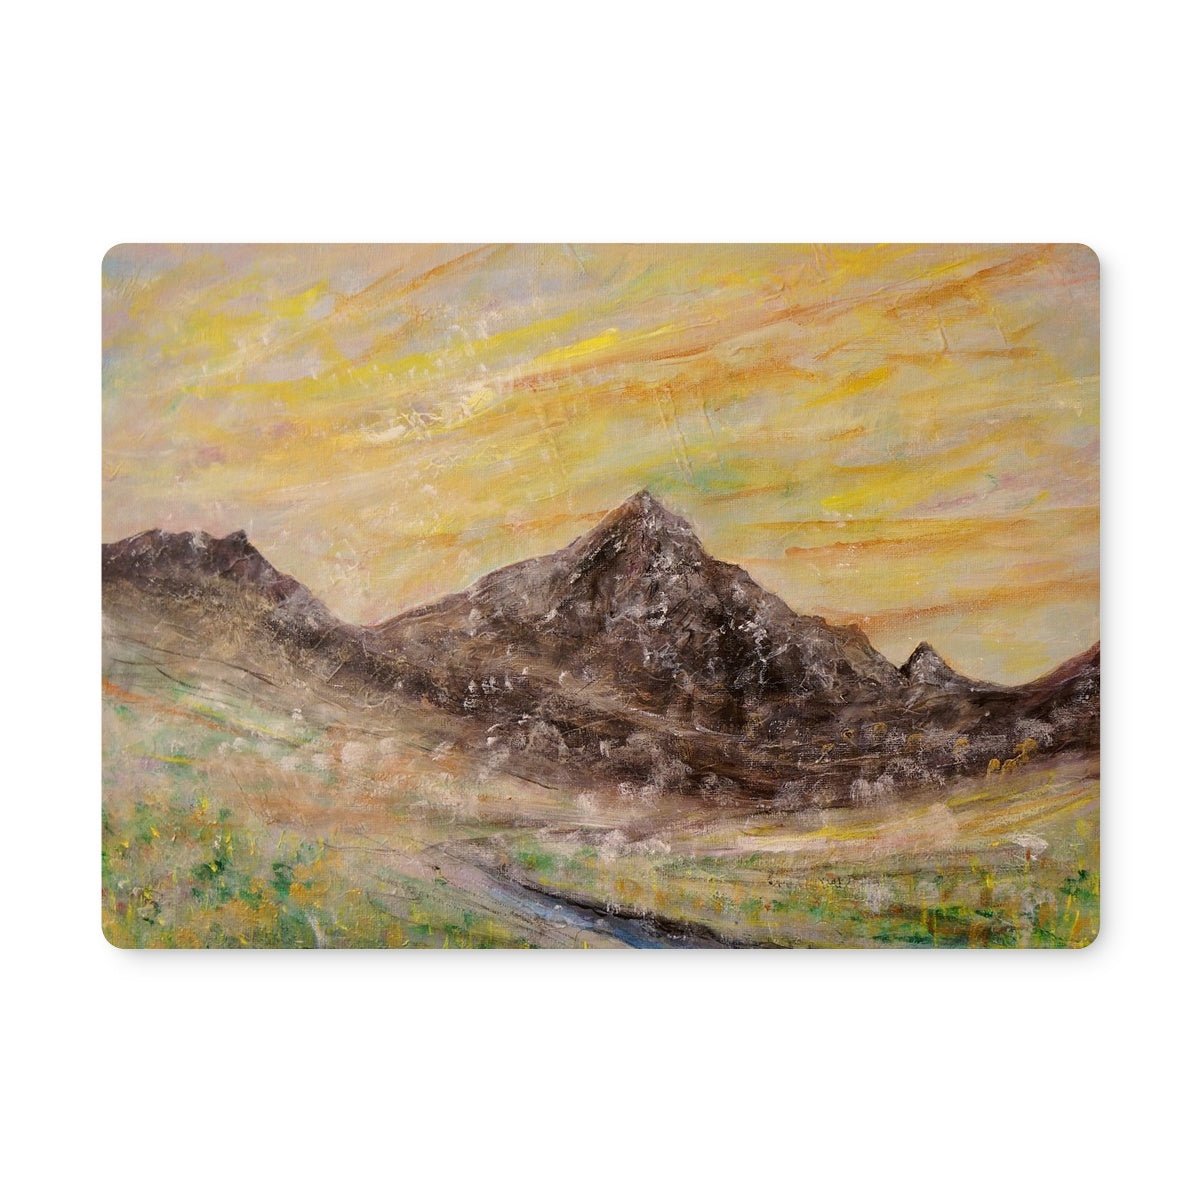 Glen Rosa Mist Arran Art Gifts Placemat-Placemats-Arran Art Gallery-4 Placemats-Paintings, Prints, Homeware, Art Gifts From Scotland By Scottish Artist Kevin Hunter